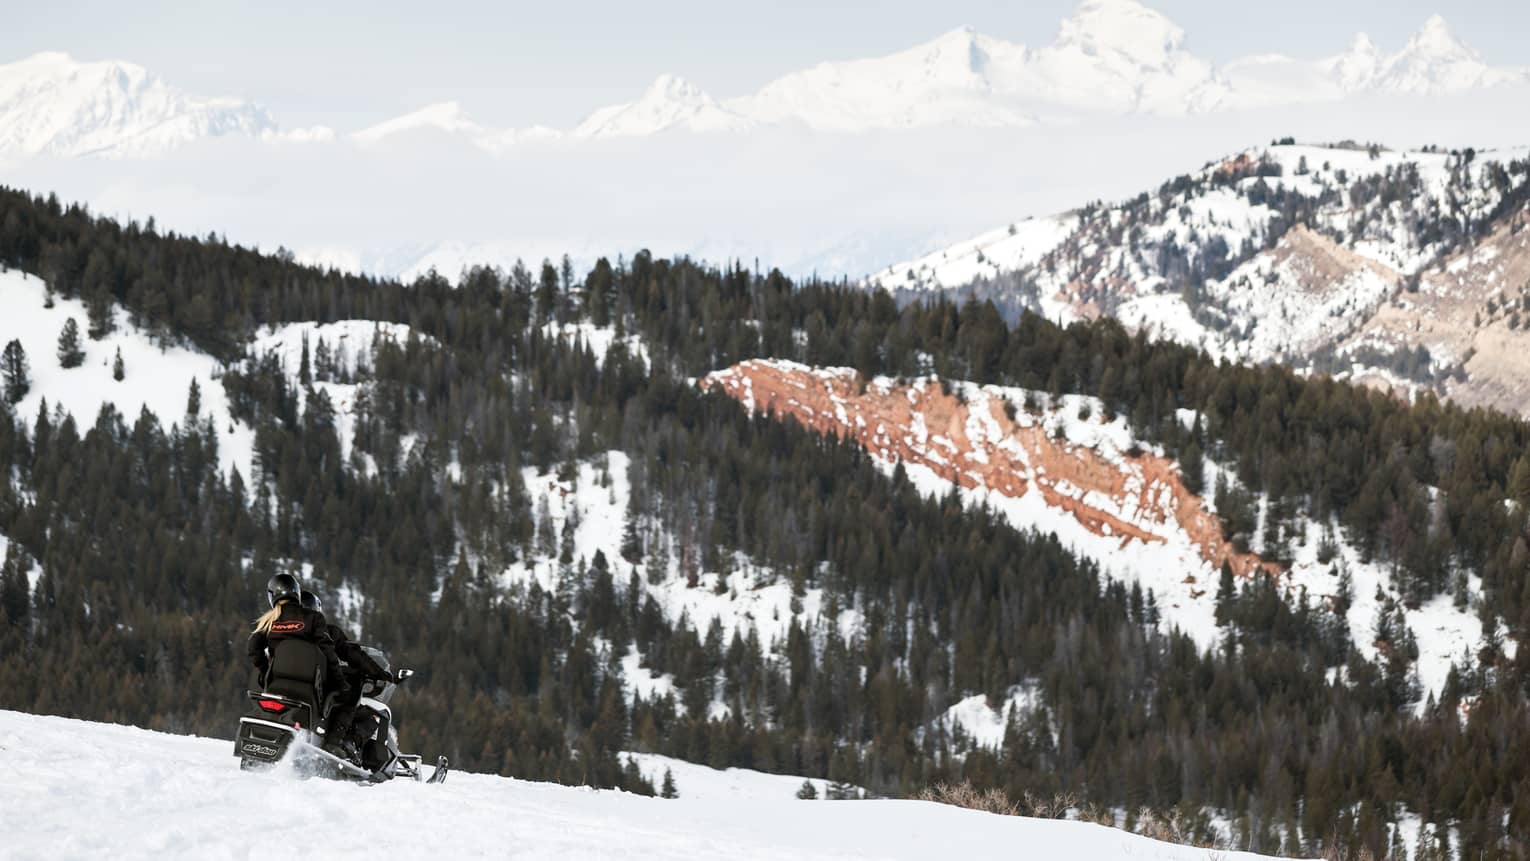 Couple rides snowmobile over mountain slope, trees and mountains in background